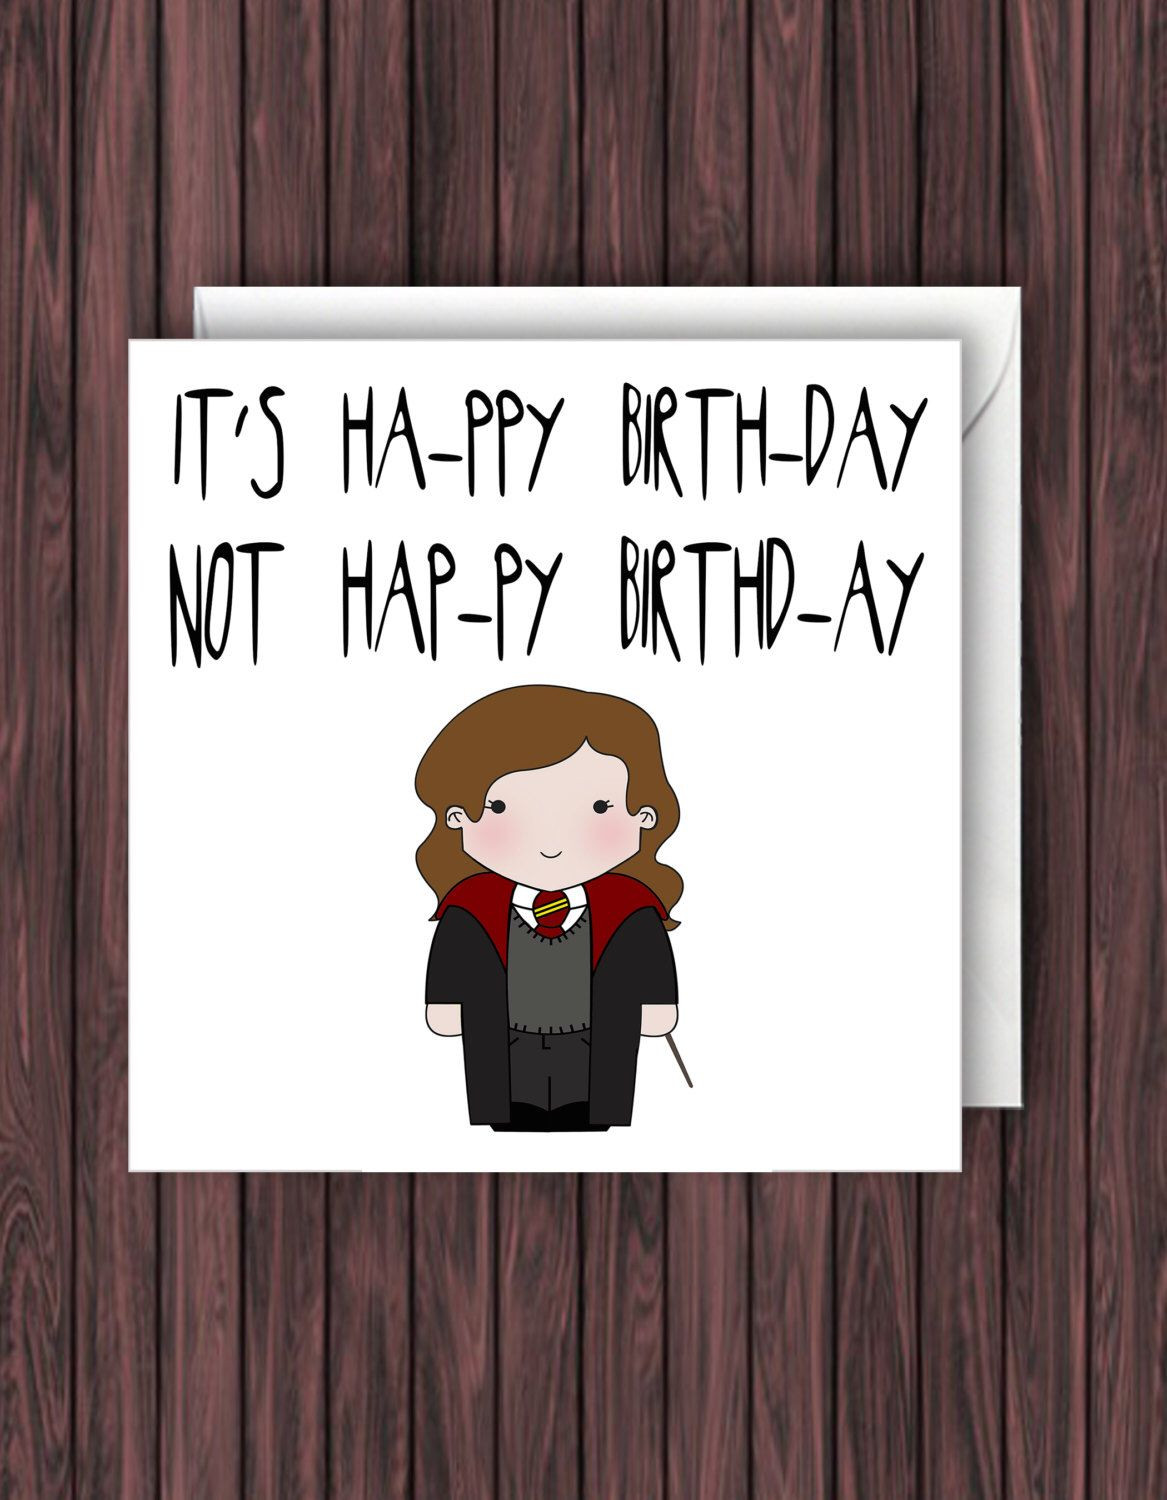 Harry Potter Birthday Quote
 Pin by Lara on Harry potter